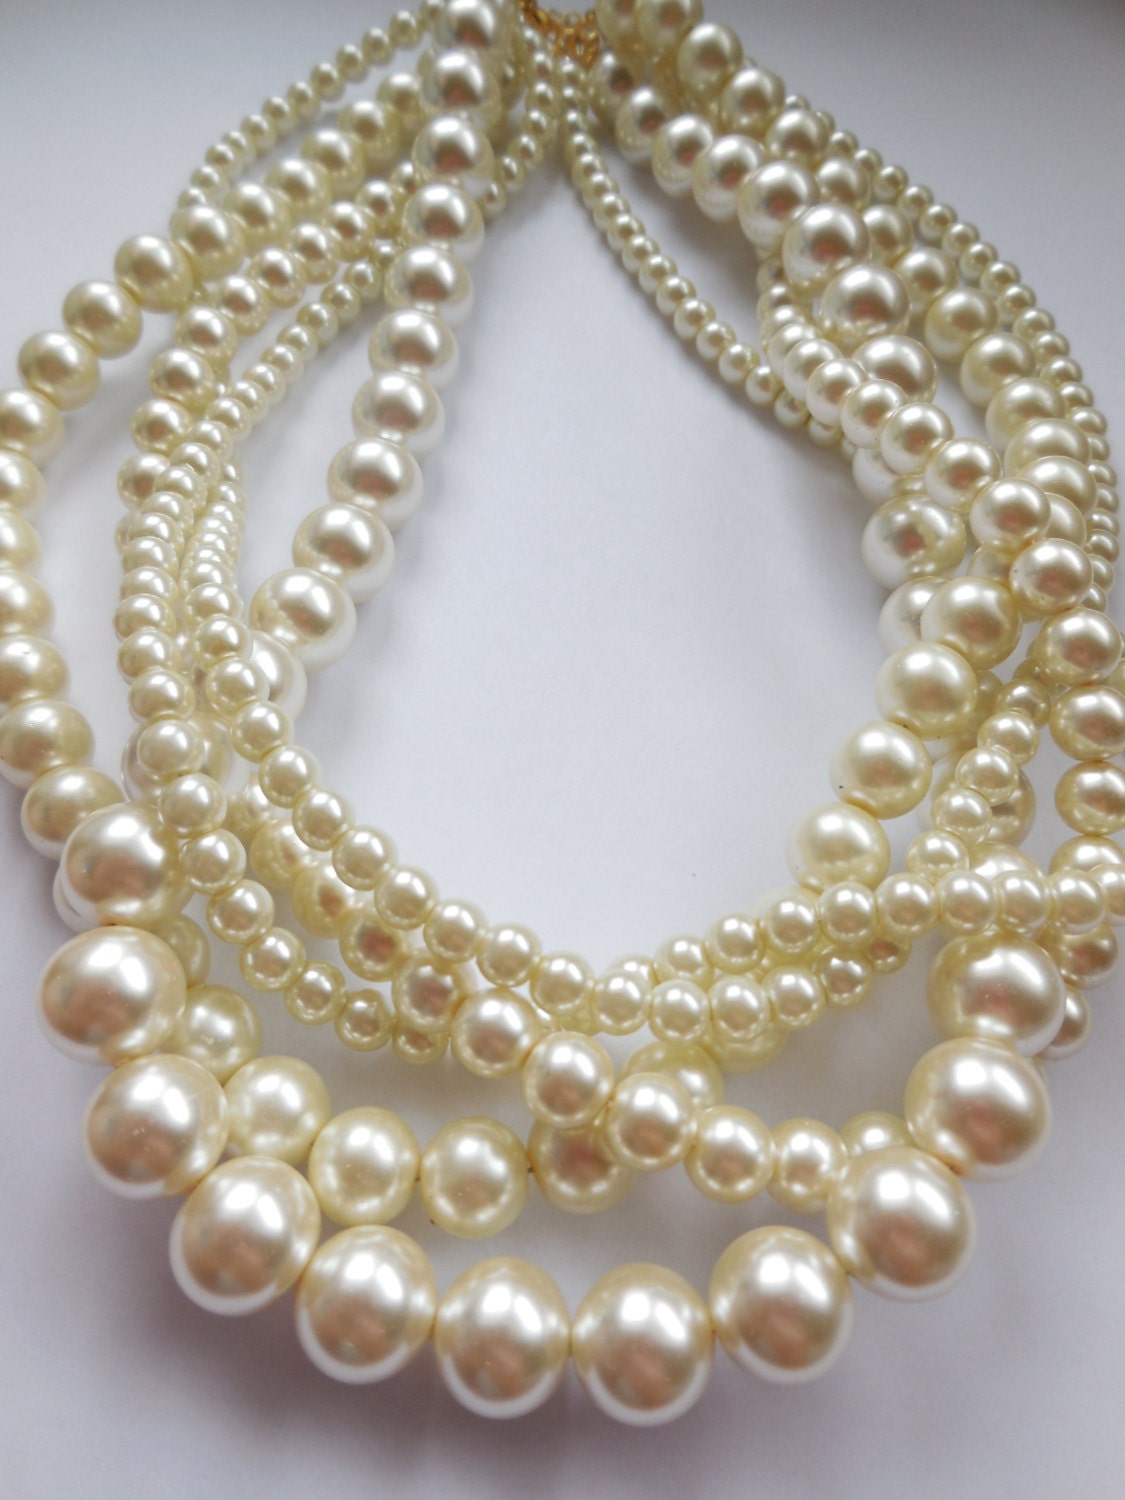 Twisted Pearl Necklace Custom Order Necklaces Braided Cream - Etsy